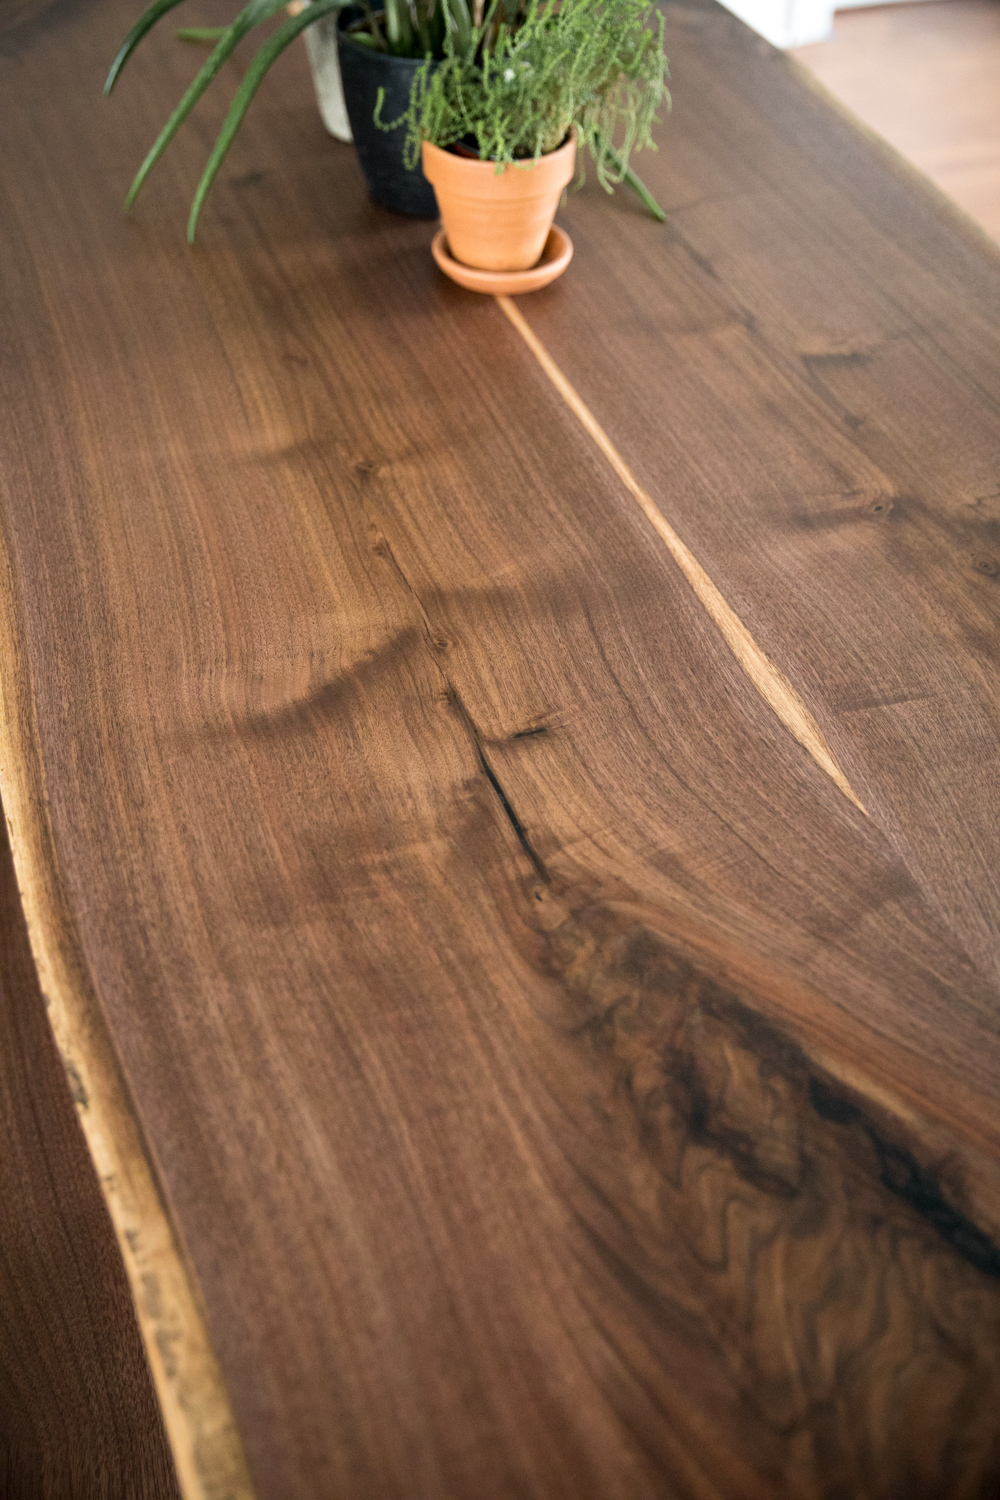 Big Tooth Co_Fort Wayne Indianapolis Woodworking _Walnut Dining Table (44 of 51).jpg